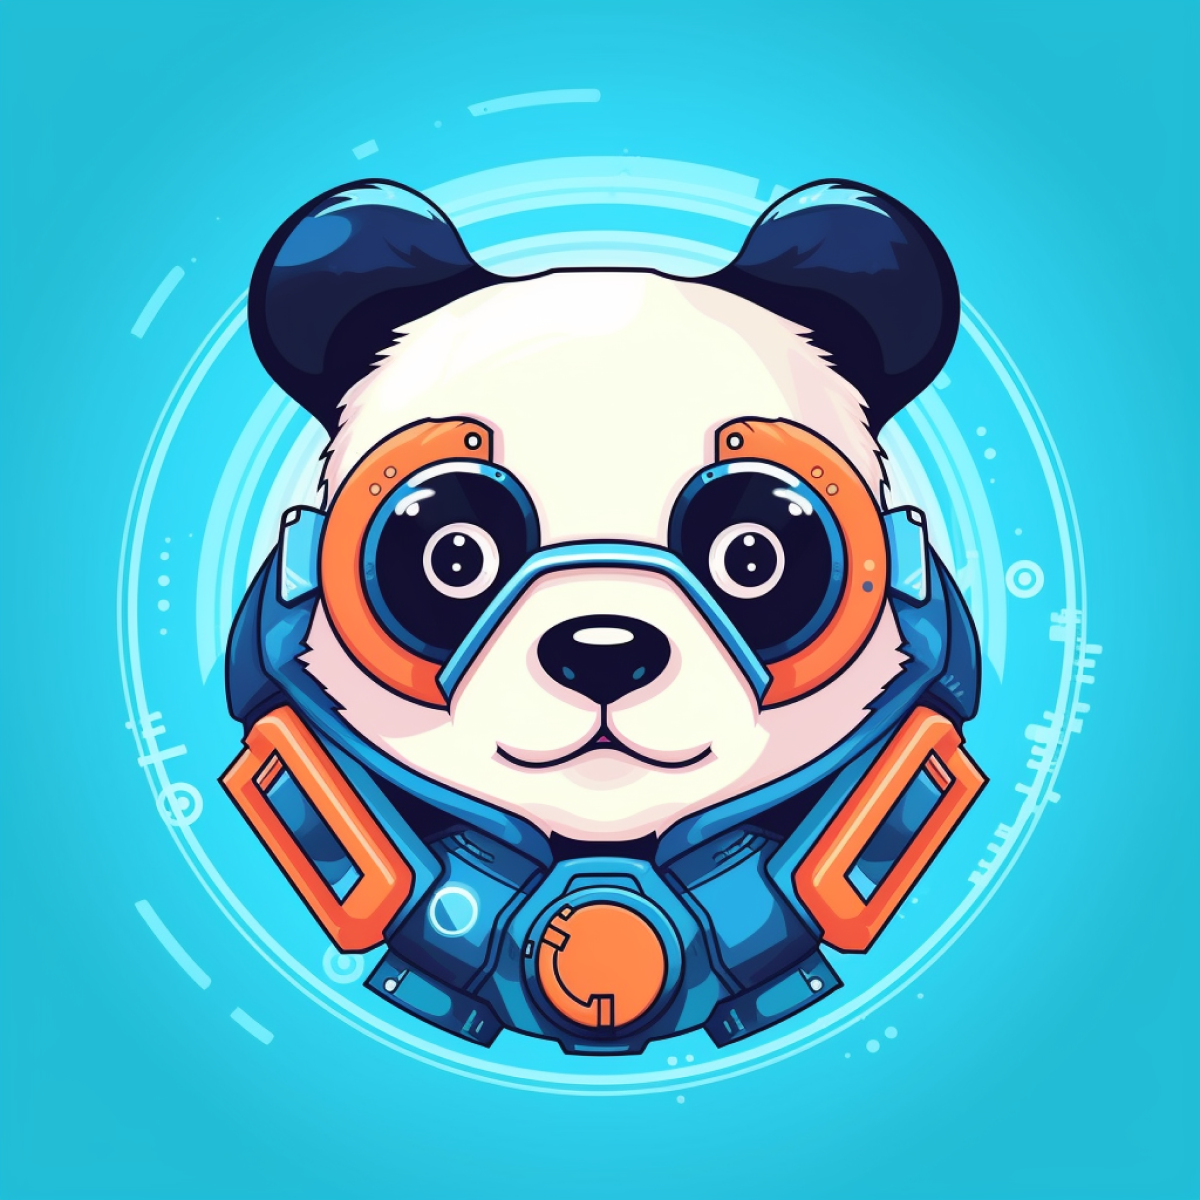 Hire Shopify Experts to integrate Pandabot ‑ AI Chat Support app into a Shopify store